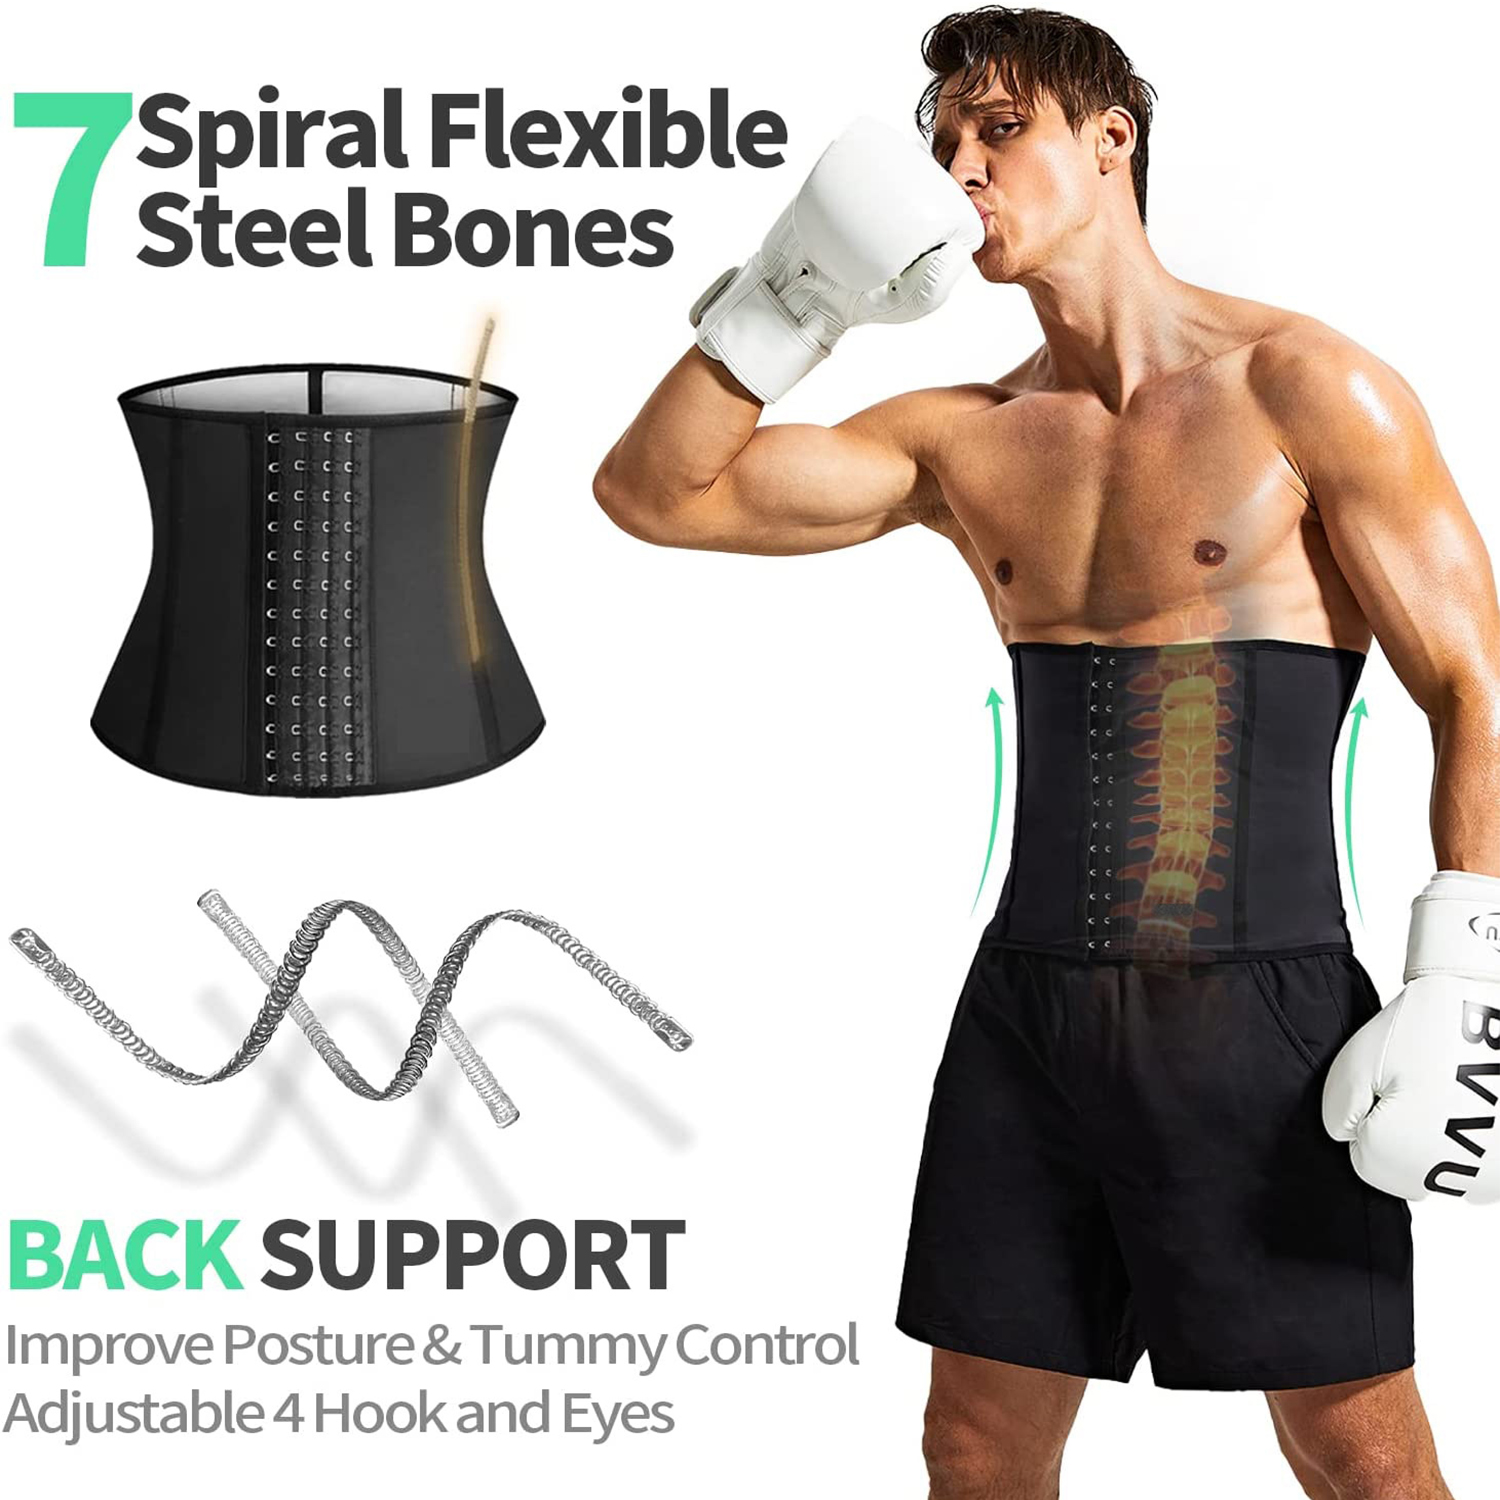  Flexible Sweat Band Waist Trainer for Women and Men